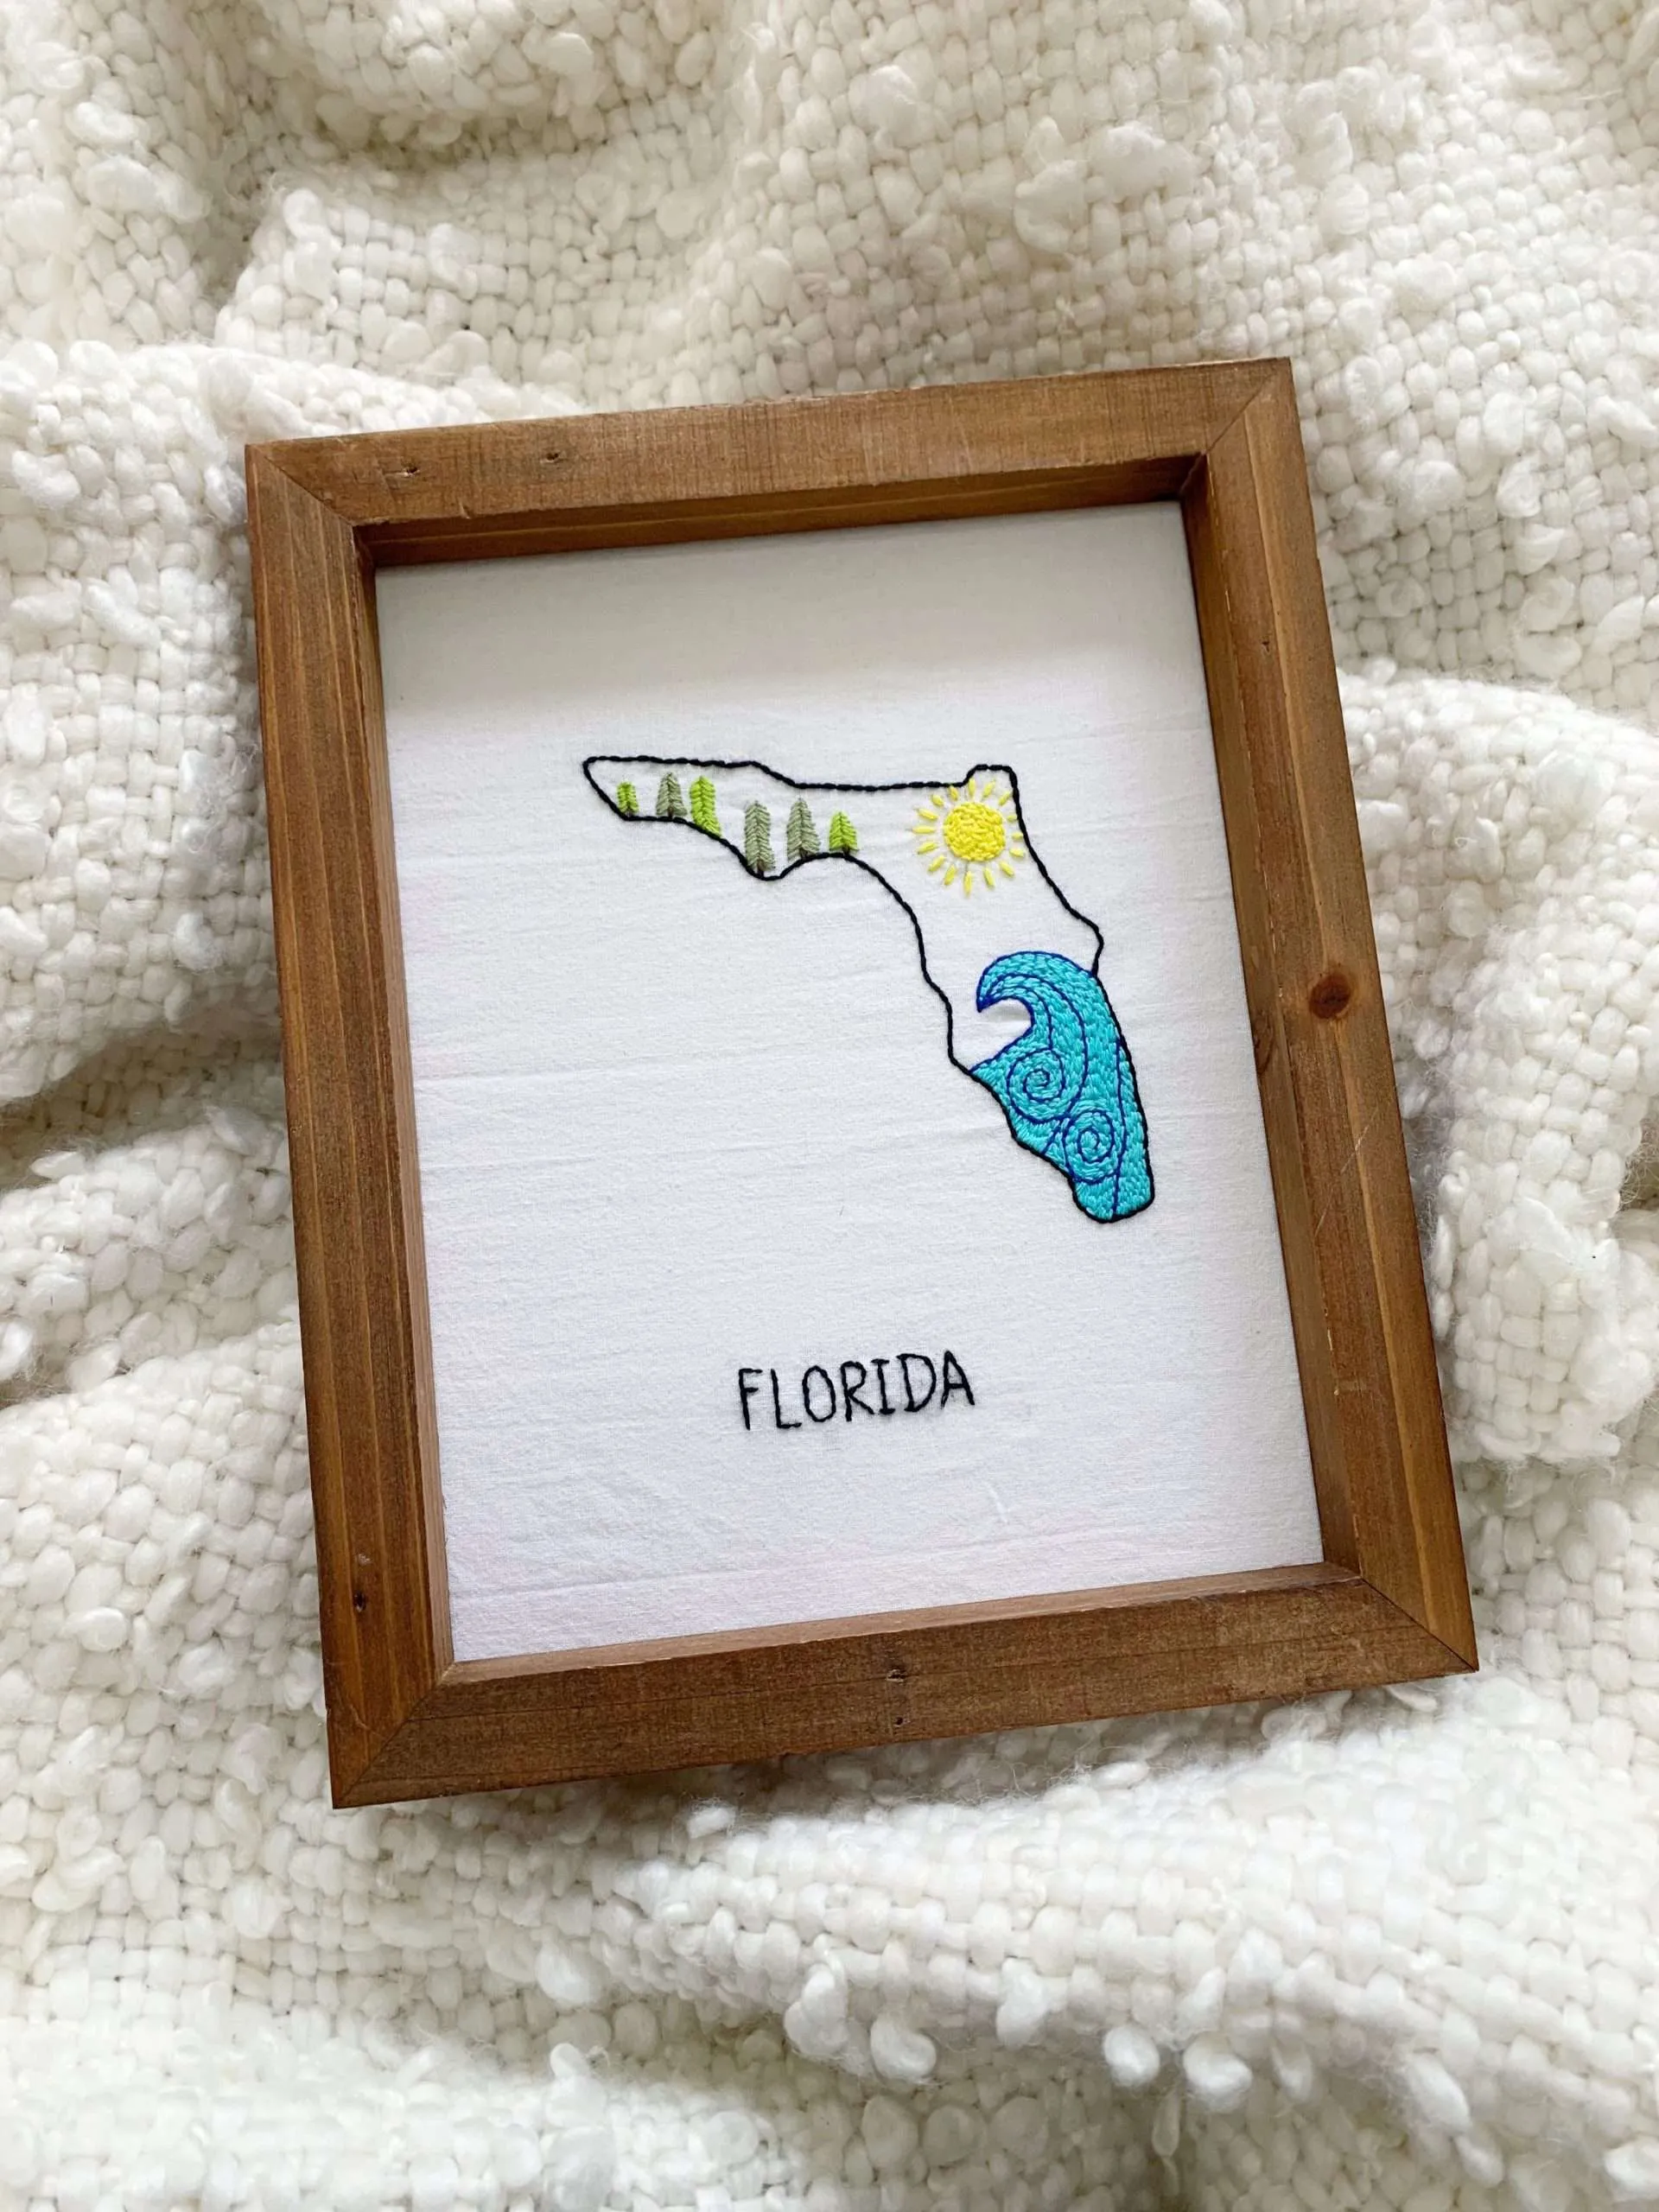 Embroidered States for military families: Florida - Eglin Air Force Base